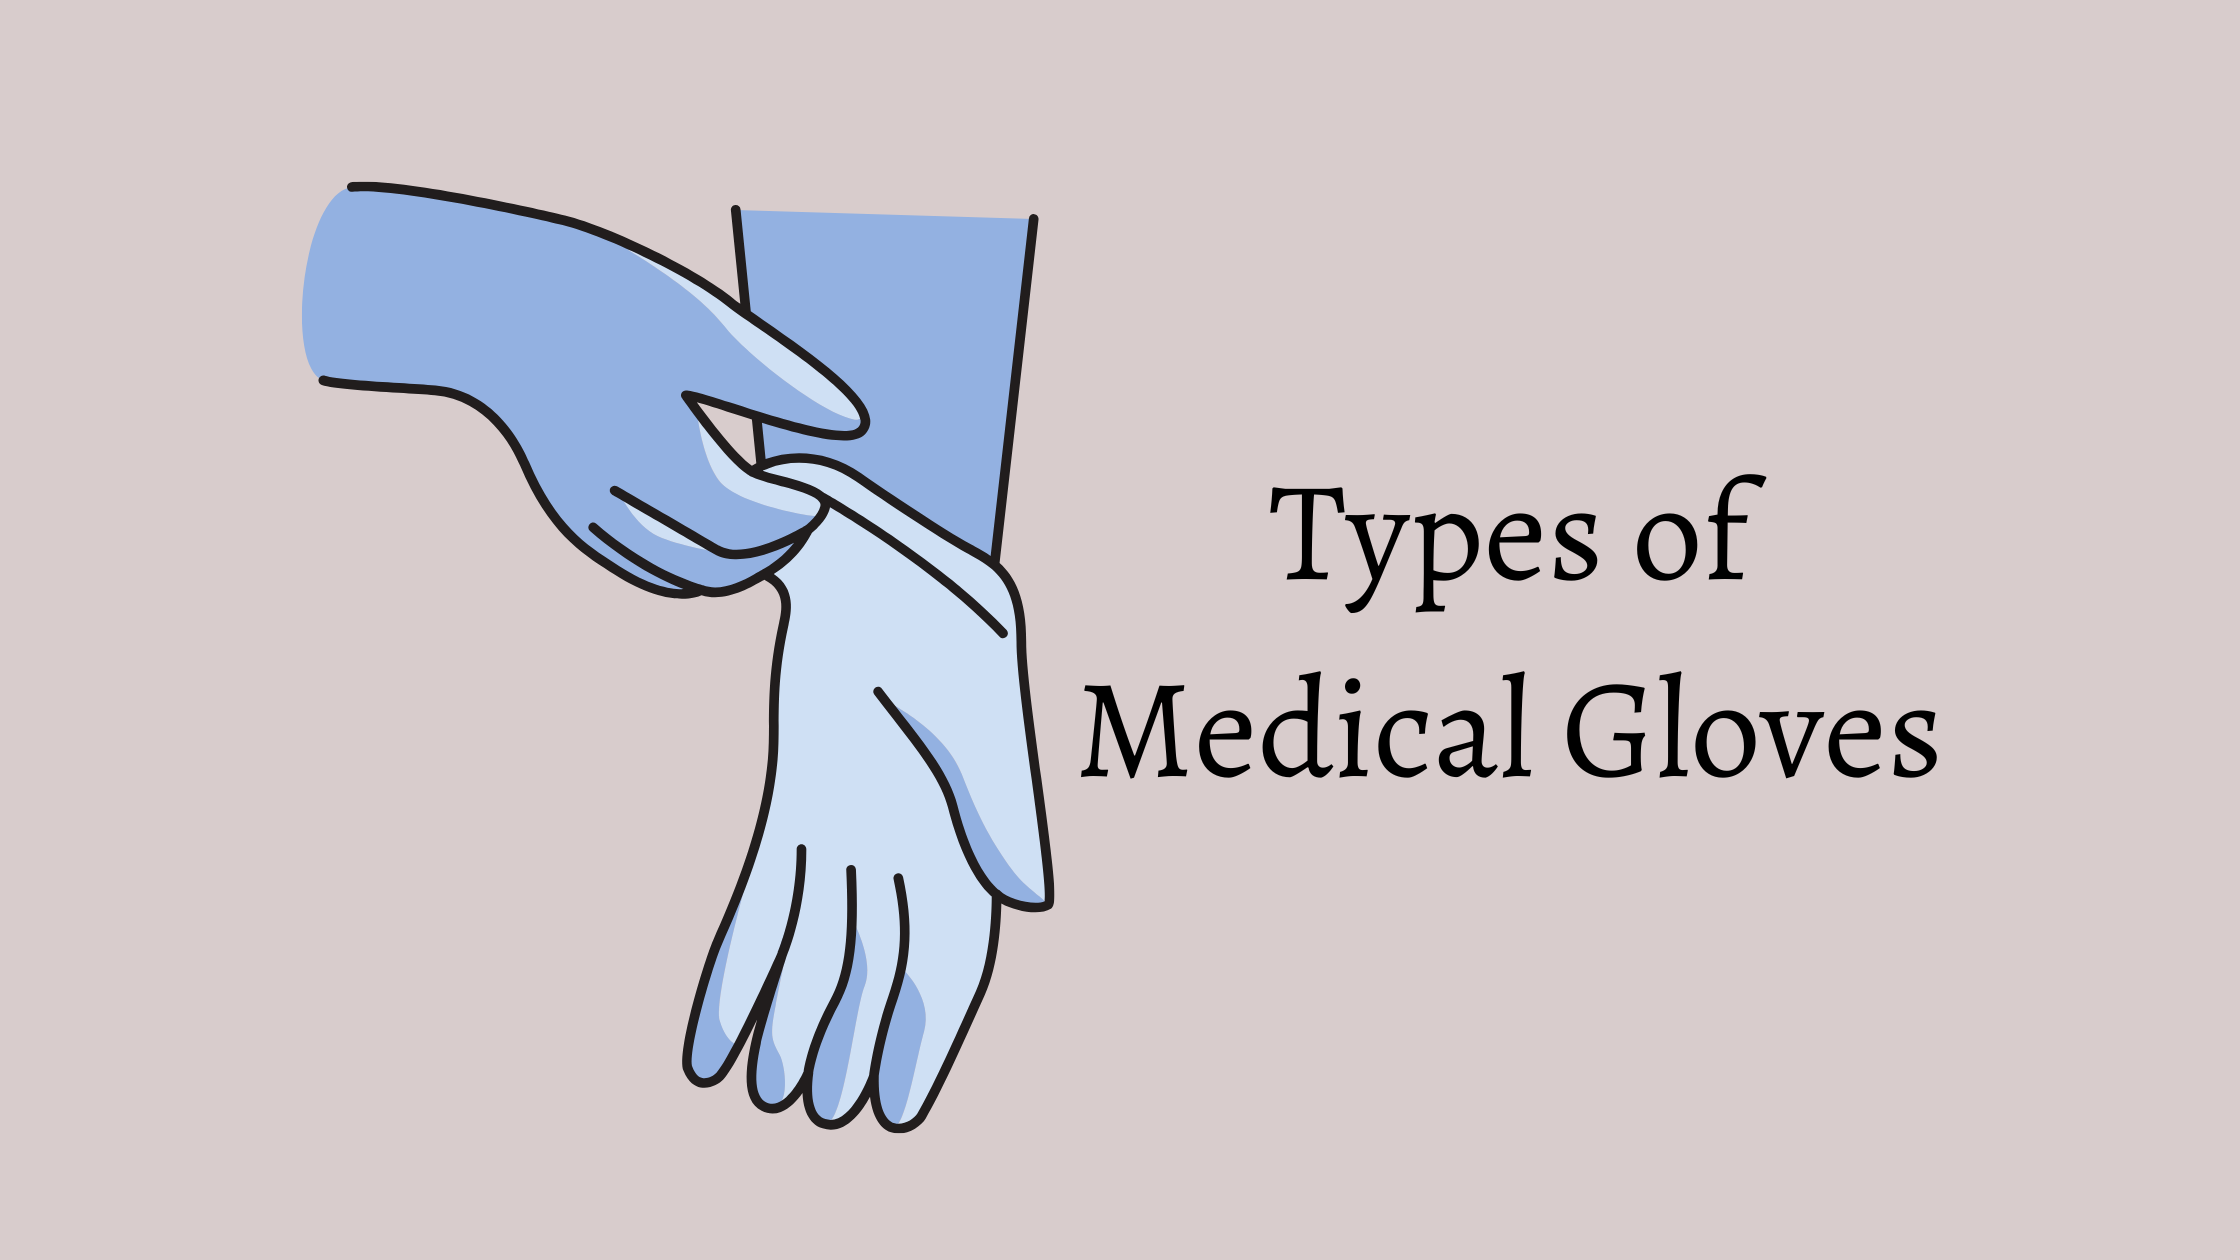 Different Types of Medical Gloves and Their Applications